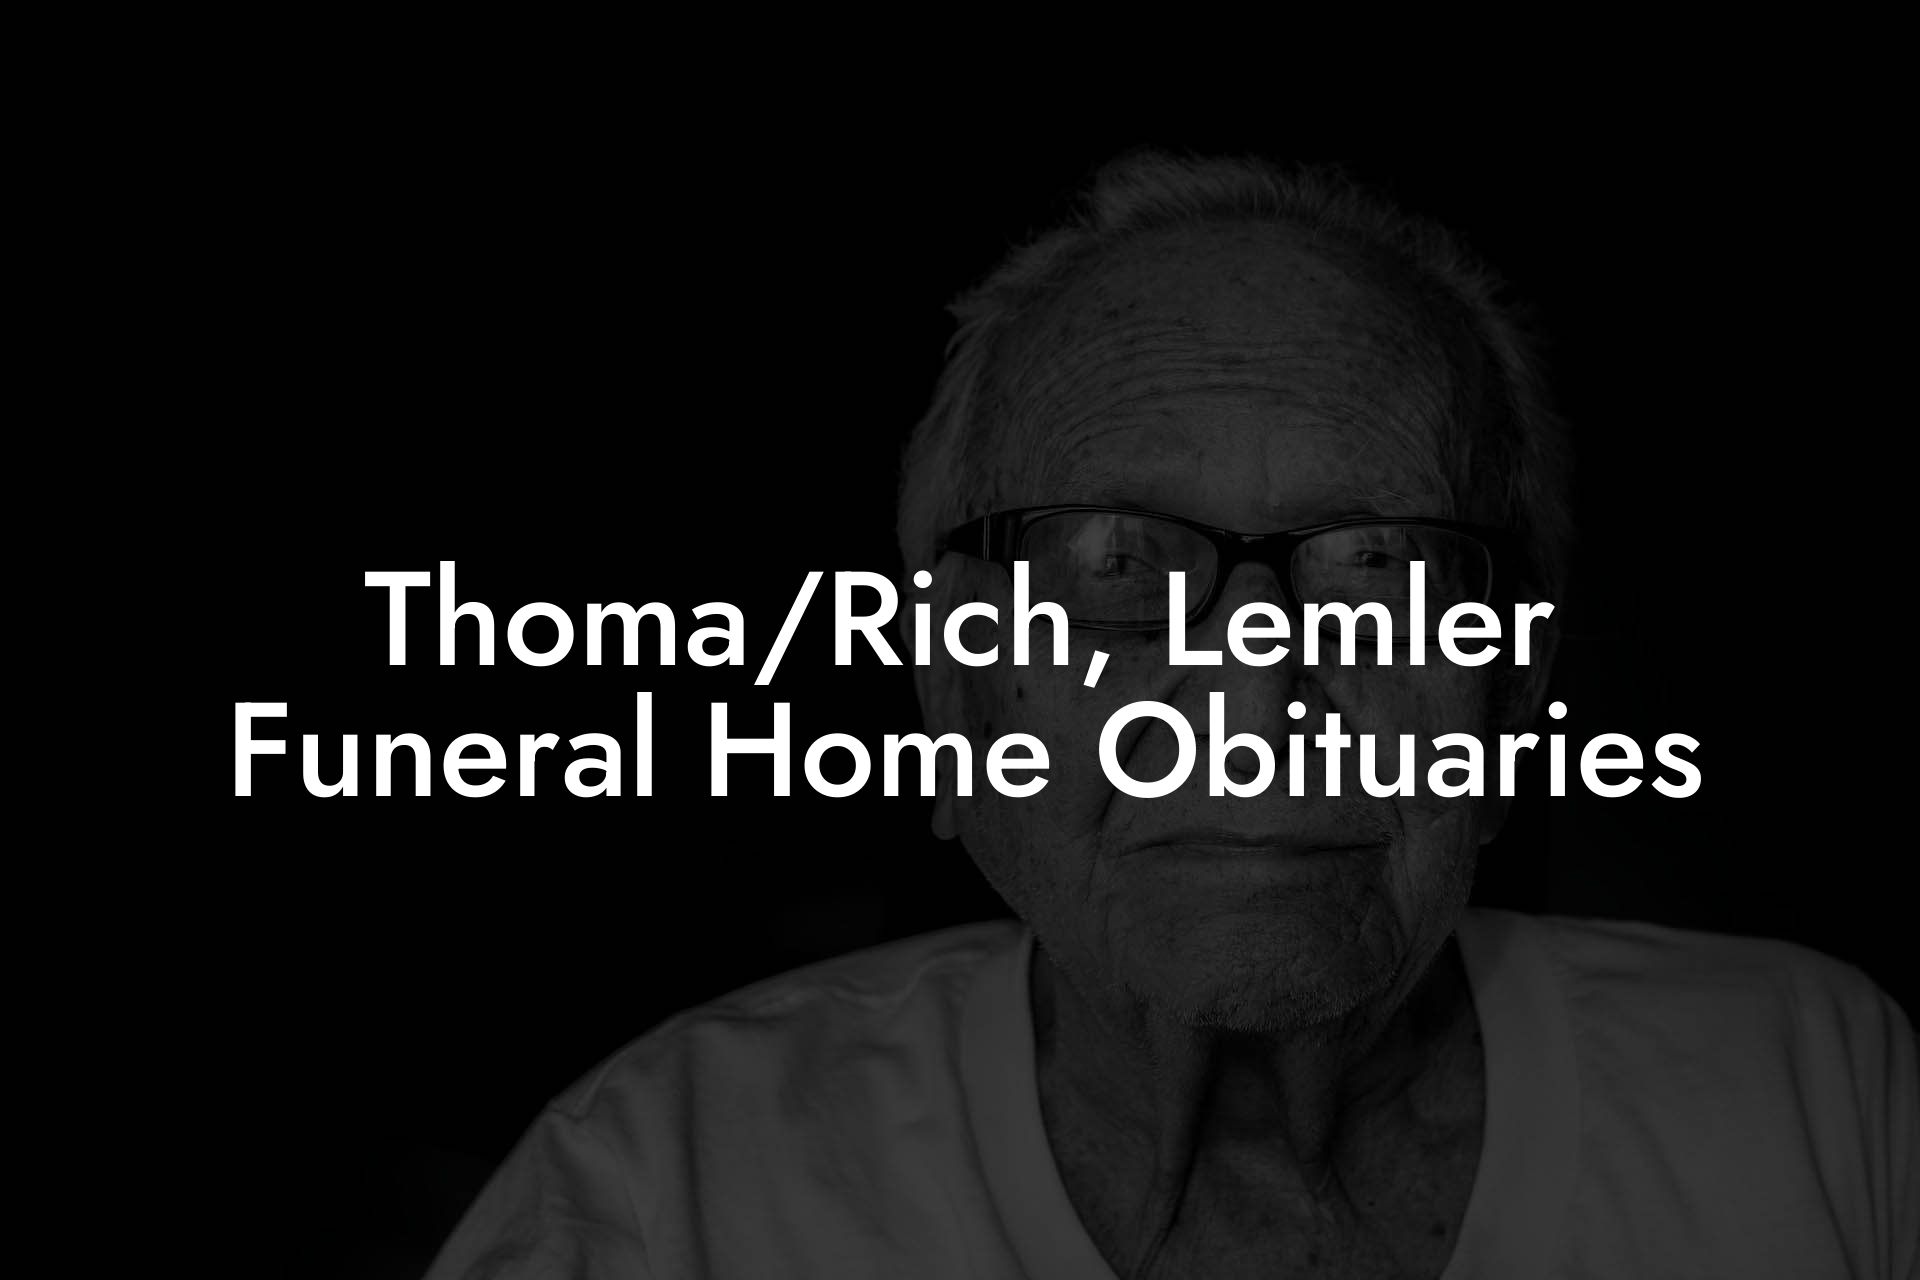 Thoma/Rich, Lemler Funeral Home Obituaries